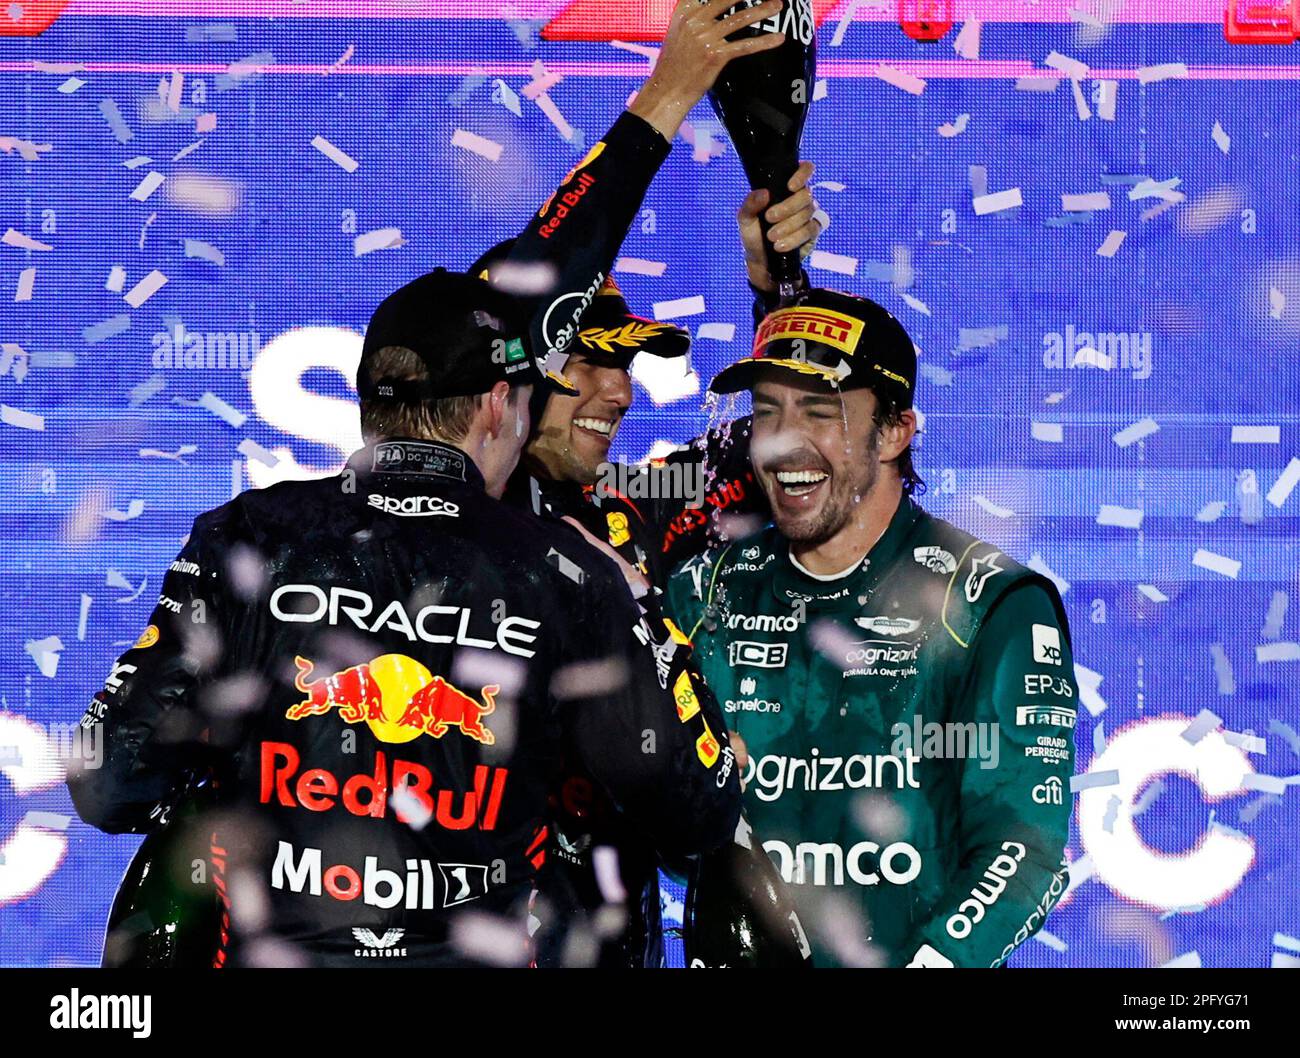 Formula One F1 - Saudi Arabian Grand Prix - Jeddah Corniche Circuit, Jeddah, Saudi Arabia - March 19, 2023 Aston Martin's Fernando Alonso celebrates on the podium after finishing third place in the Saudi Arabian Grand Prix with winner Red Bull's Sergio Perez and second placed Red Bull's Max Verstappen before he was handed a 10 second time penalty that drops him to fourth place in the final results REUTERS/Hamad I Mohammed Stock Photo